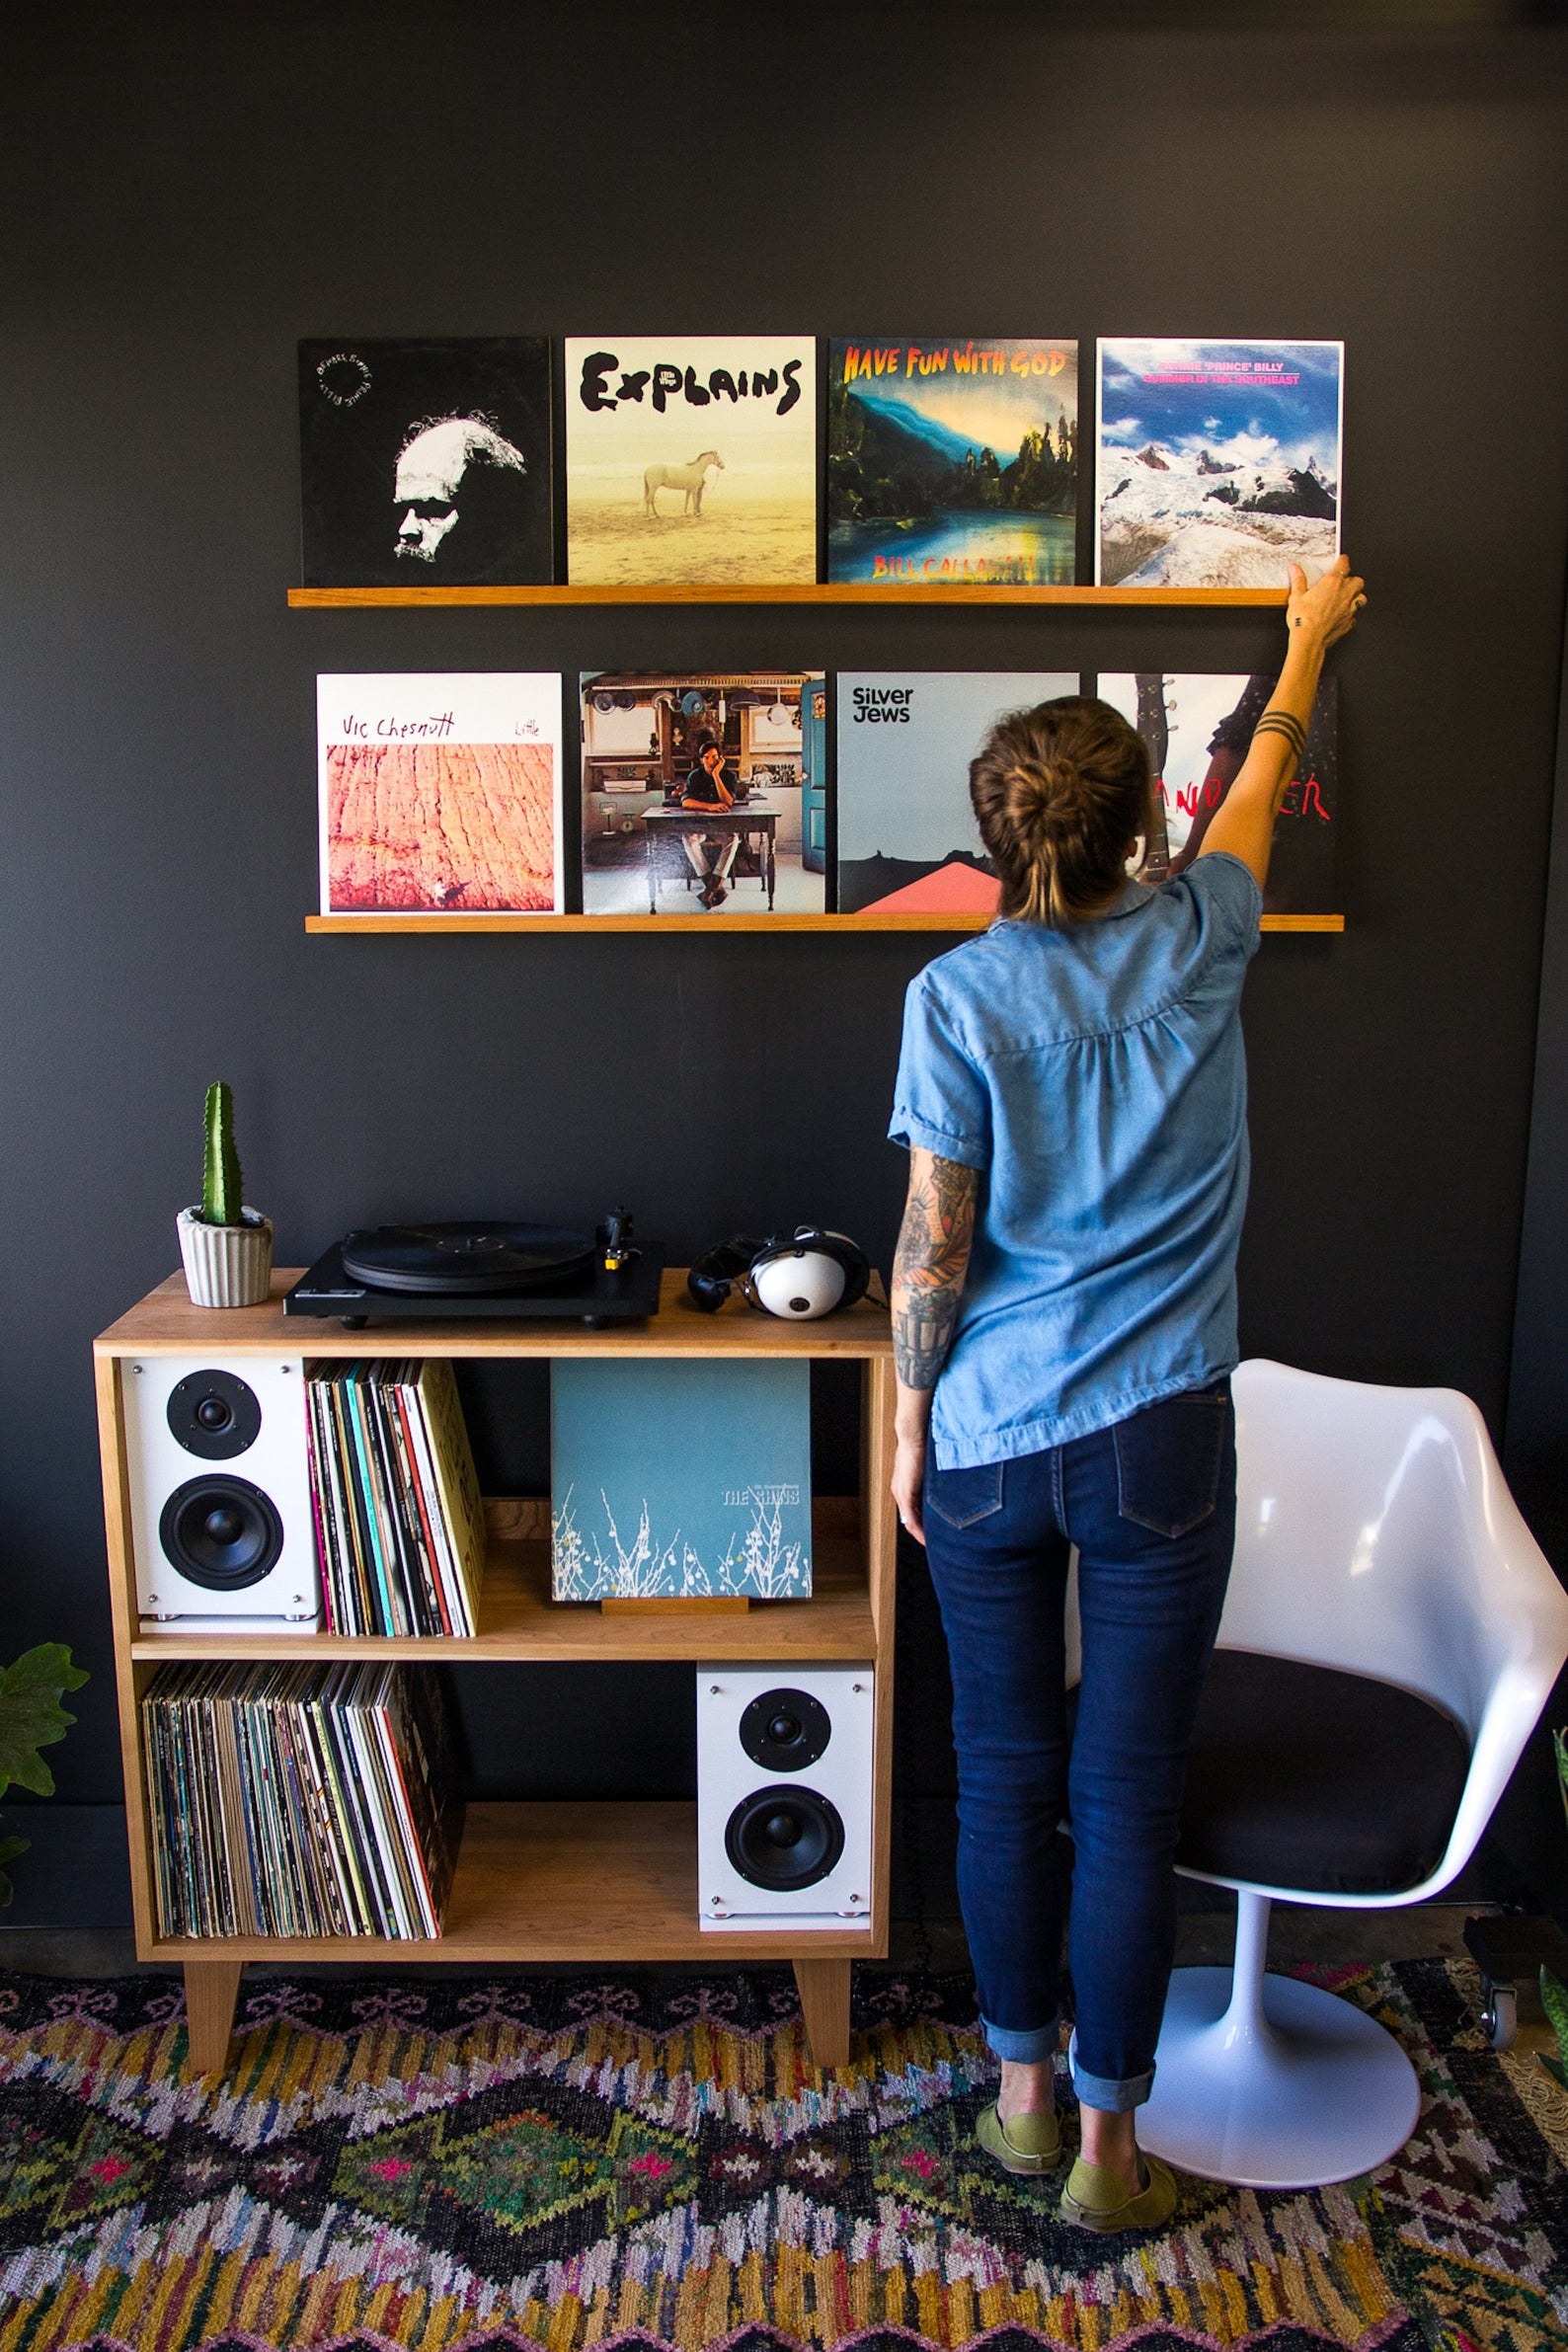 Two ledges displaying a variety of records above a record player